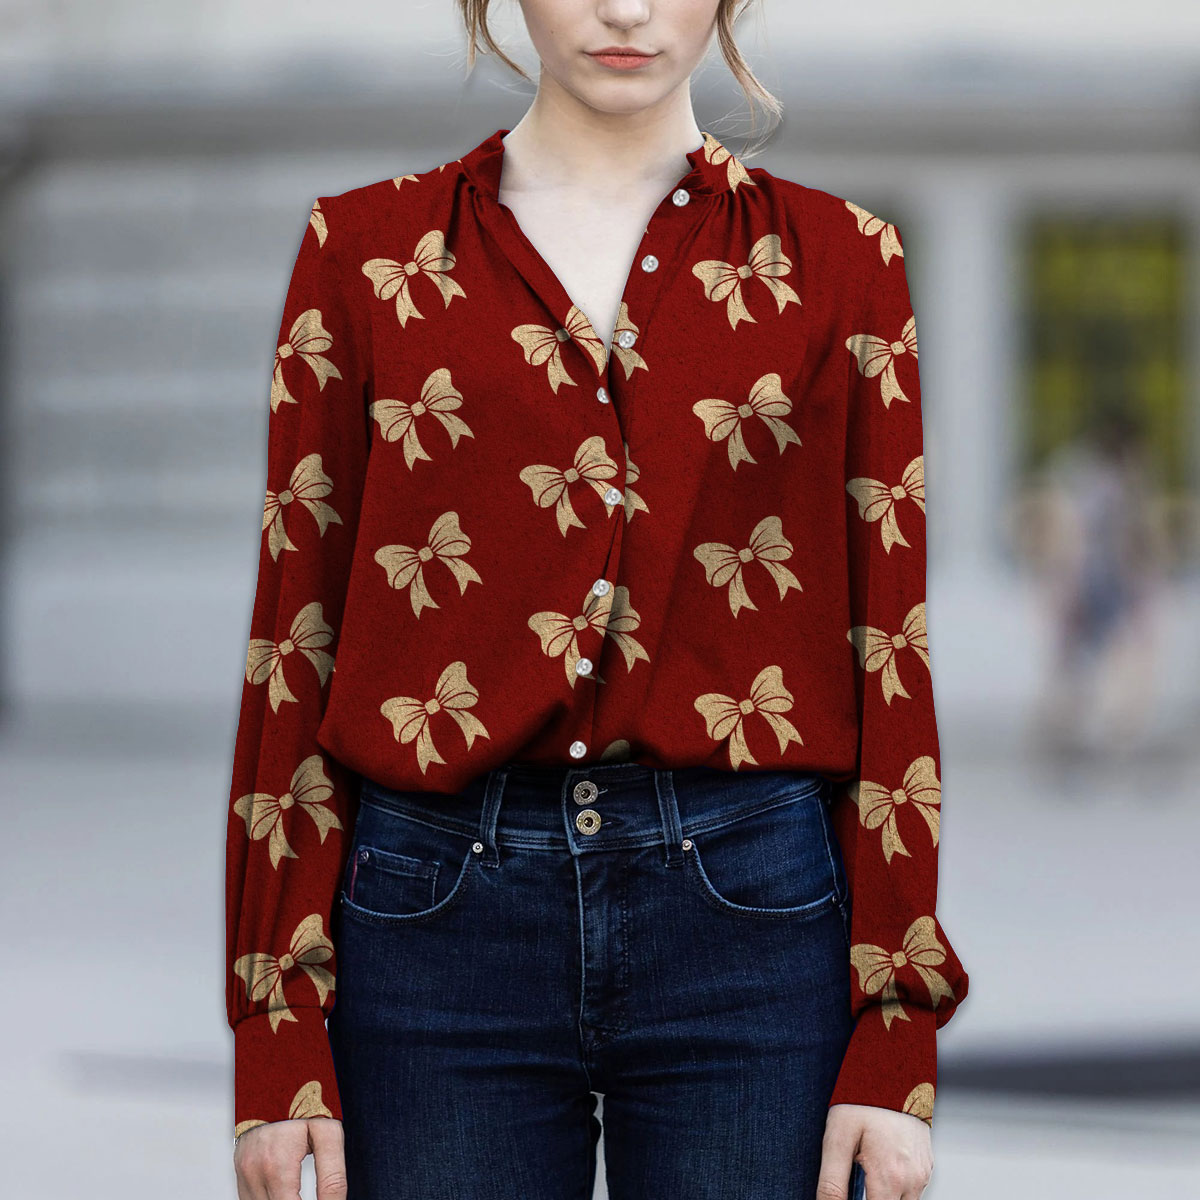 Christmas Bow, Christmas Tree Bows On Red V-Neckline Blouses